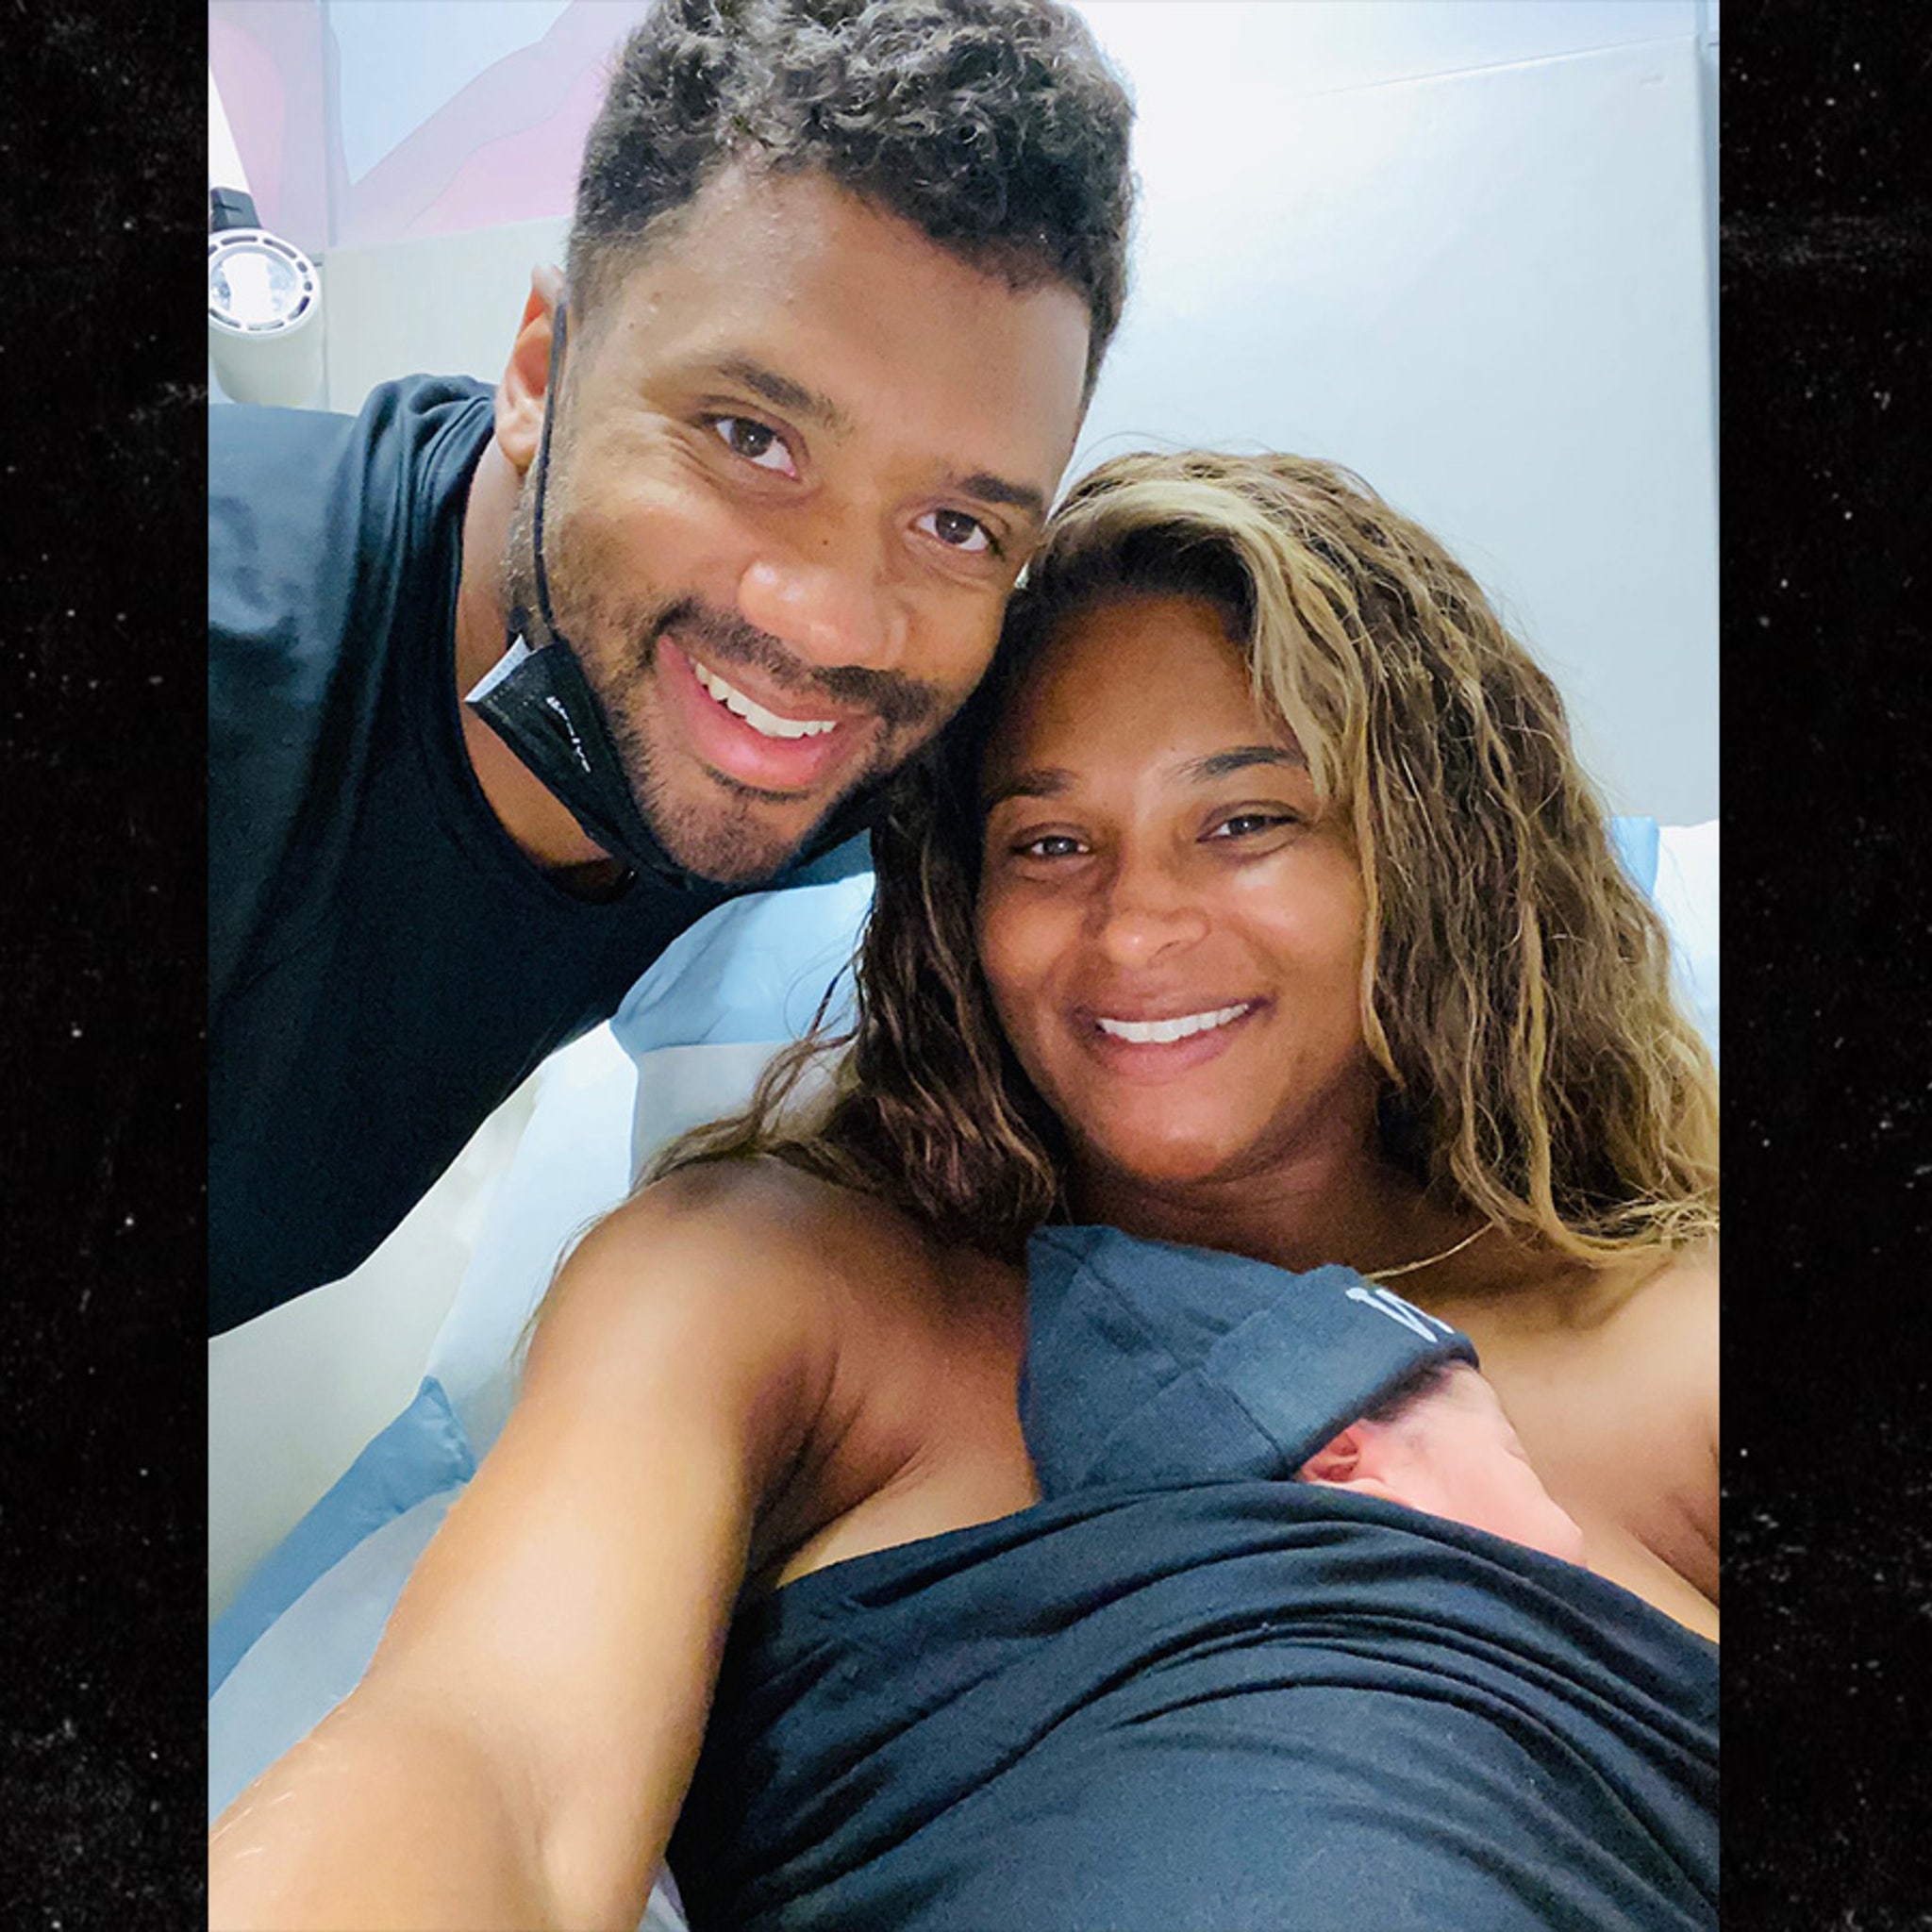 Russell Wilson shares photo of Ciara & new baby – STAR 94.5